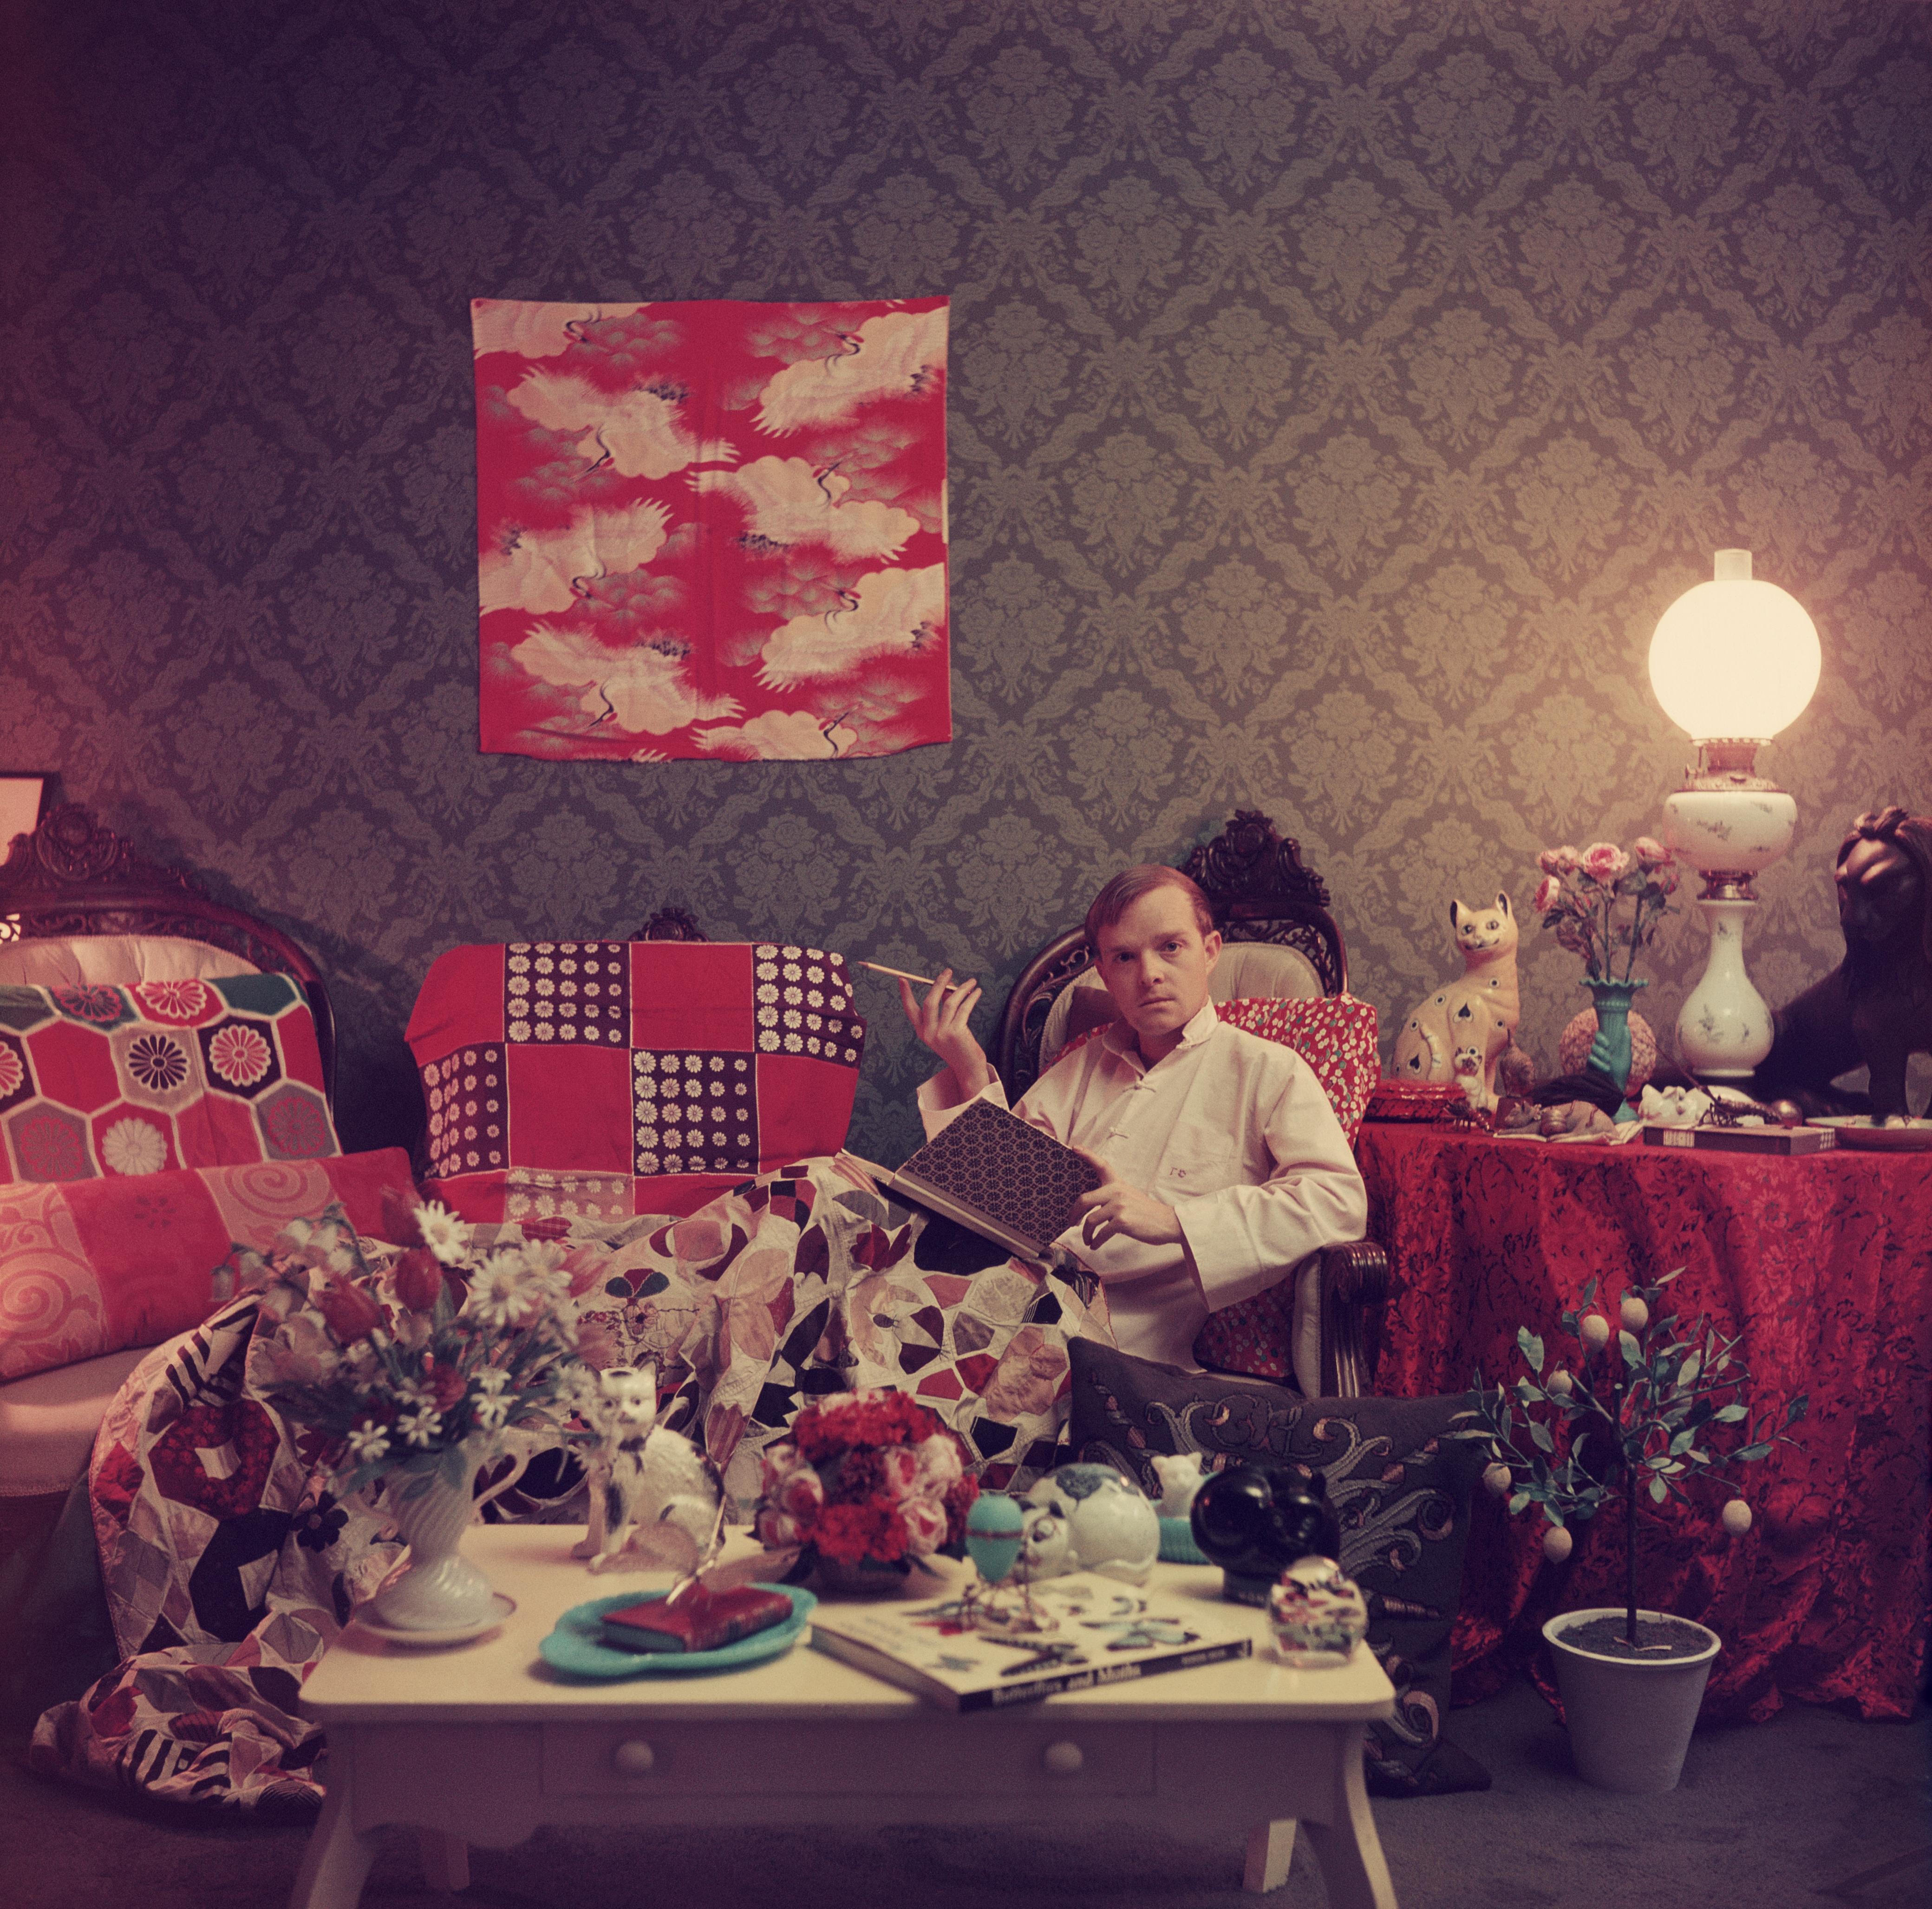 'Capote At Home' 1958 Slim Aarons Limited Estate Edition
Author Truman Capote (1924 – 1984) relaxes with a book and a cigarette in his cluttered apartment, Brooklyn Heights, New York. 1958.

Slim Aarons Chromogenic C print 
Printed Later 
Slim